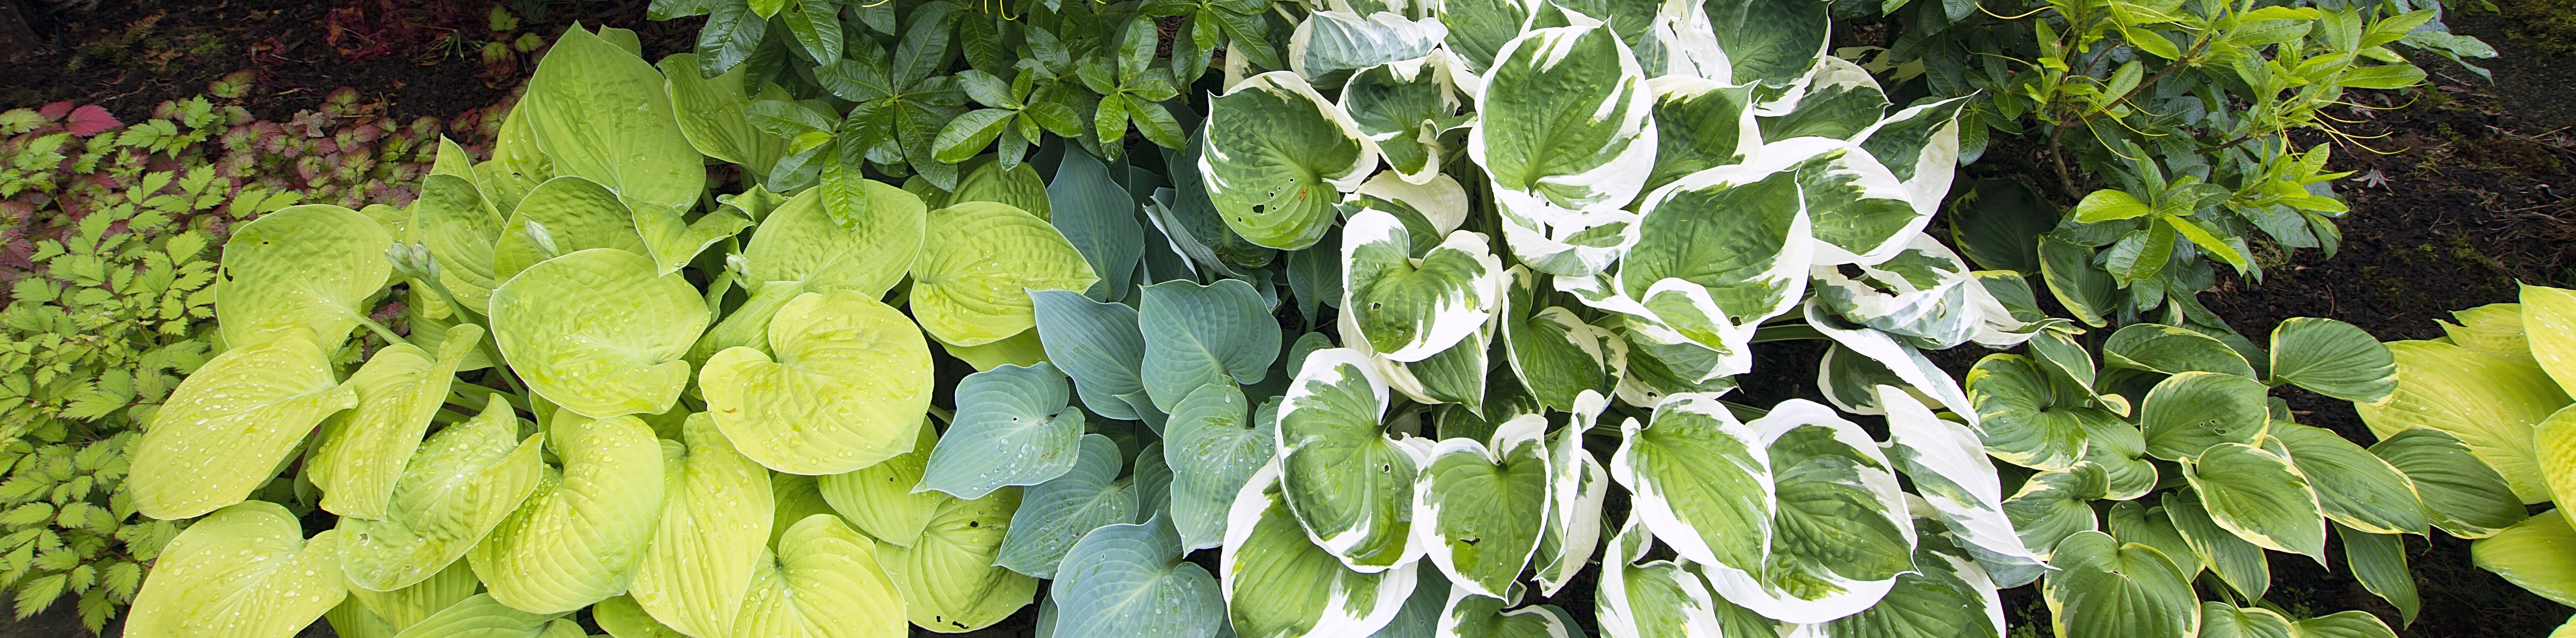 Hostas in a landscaping bed. Hosta cultivars come in an amazing variety of colors, patterns, textures, and sizes.